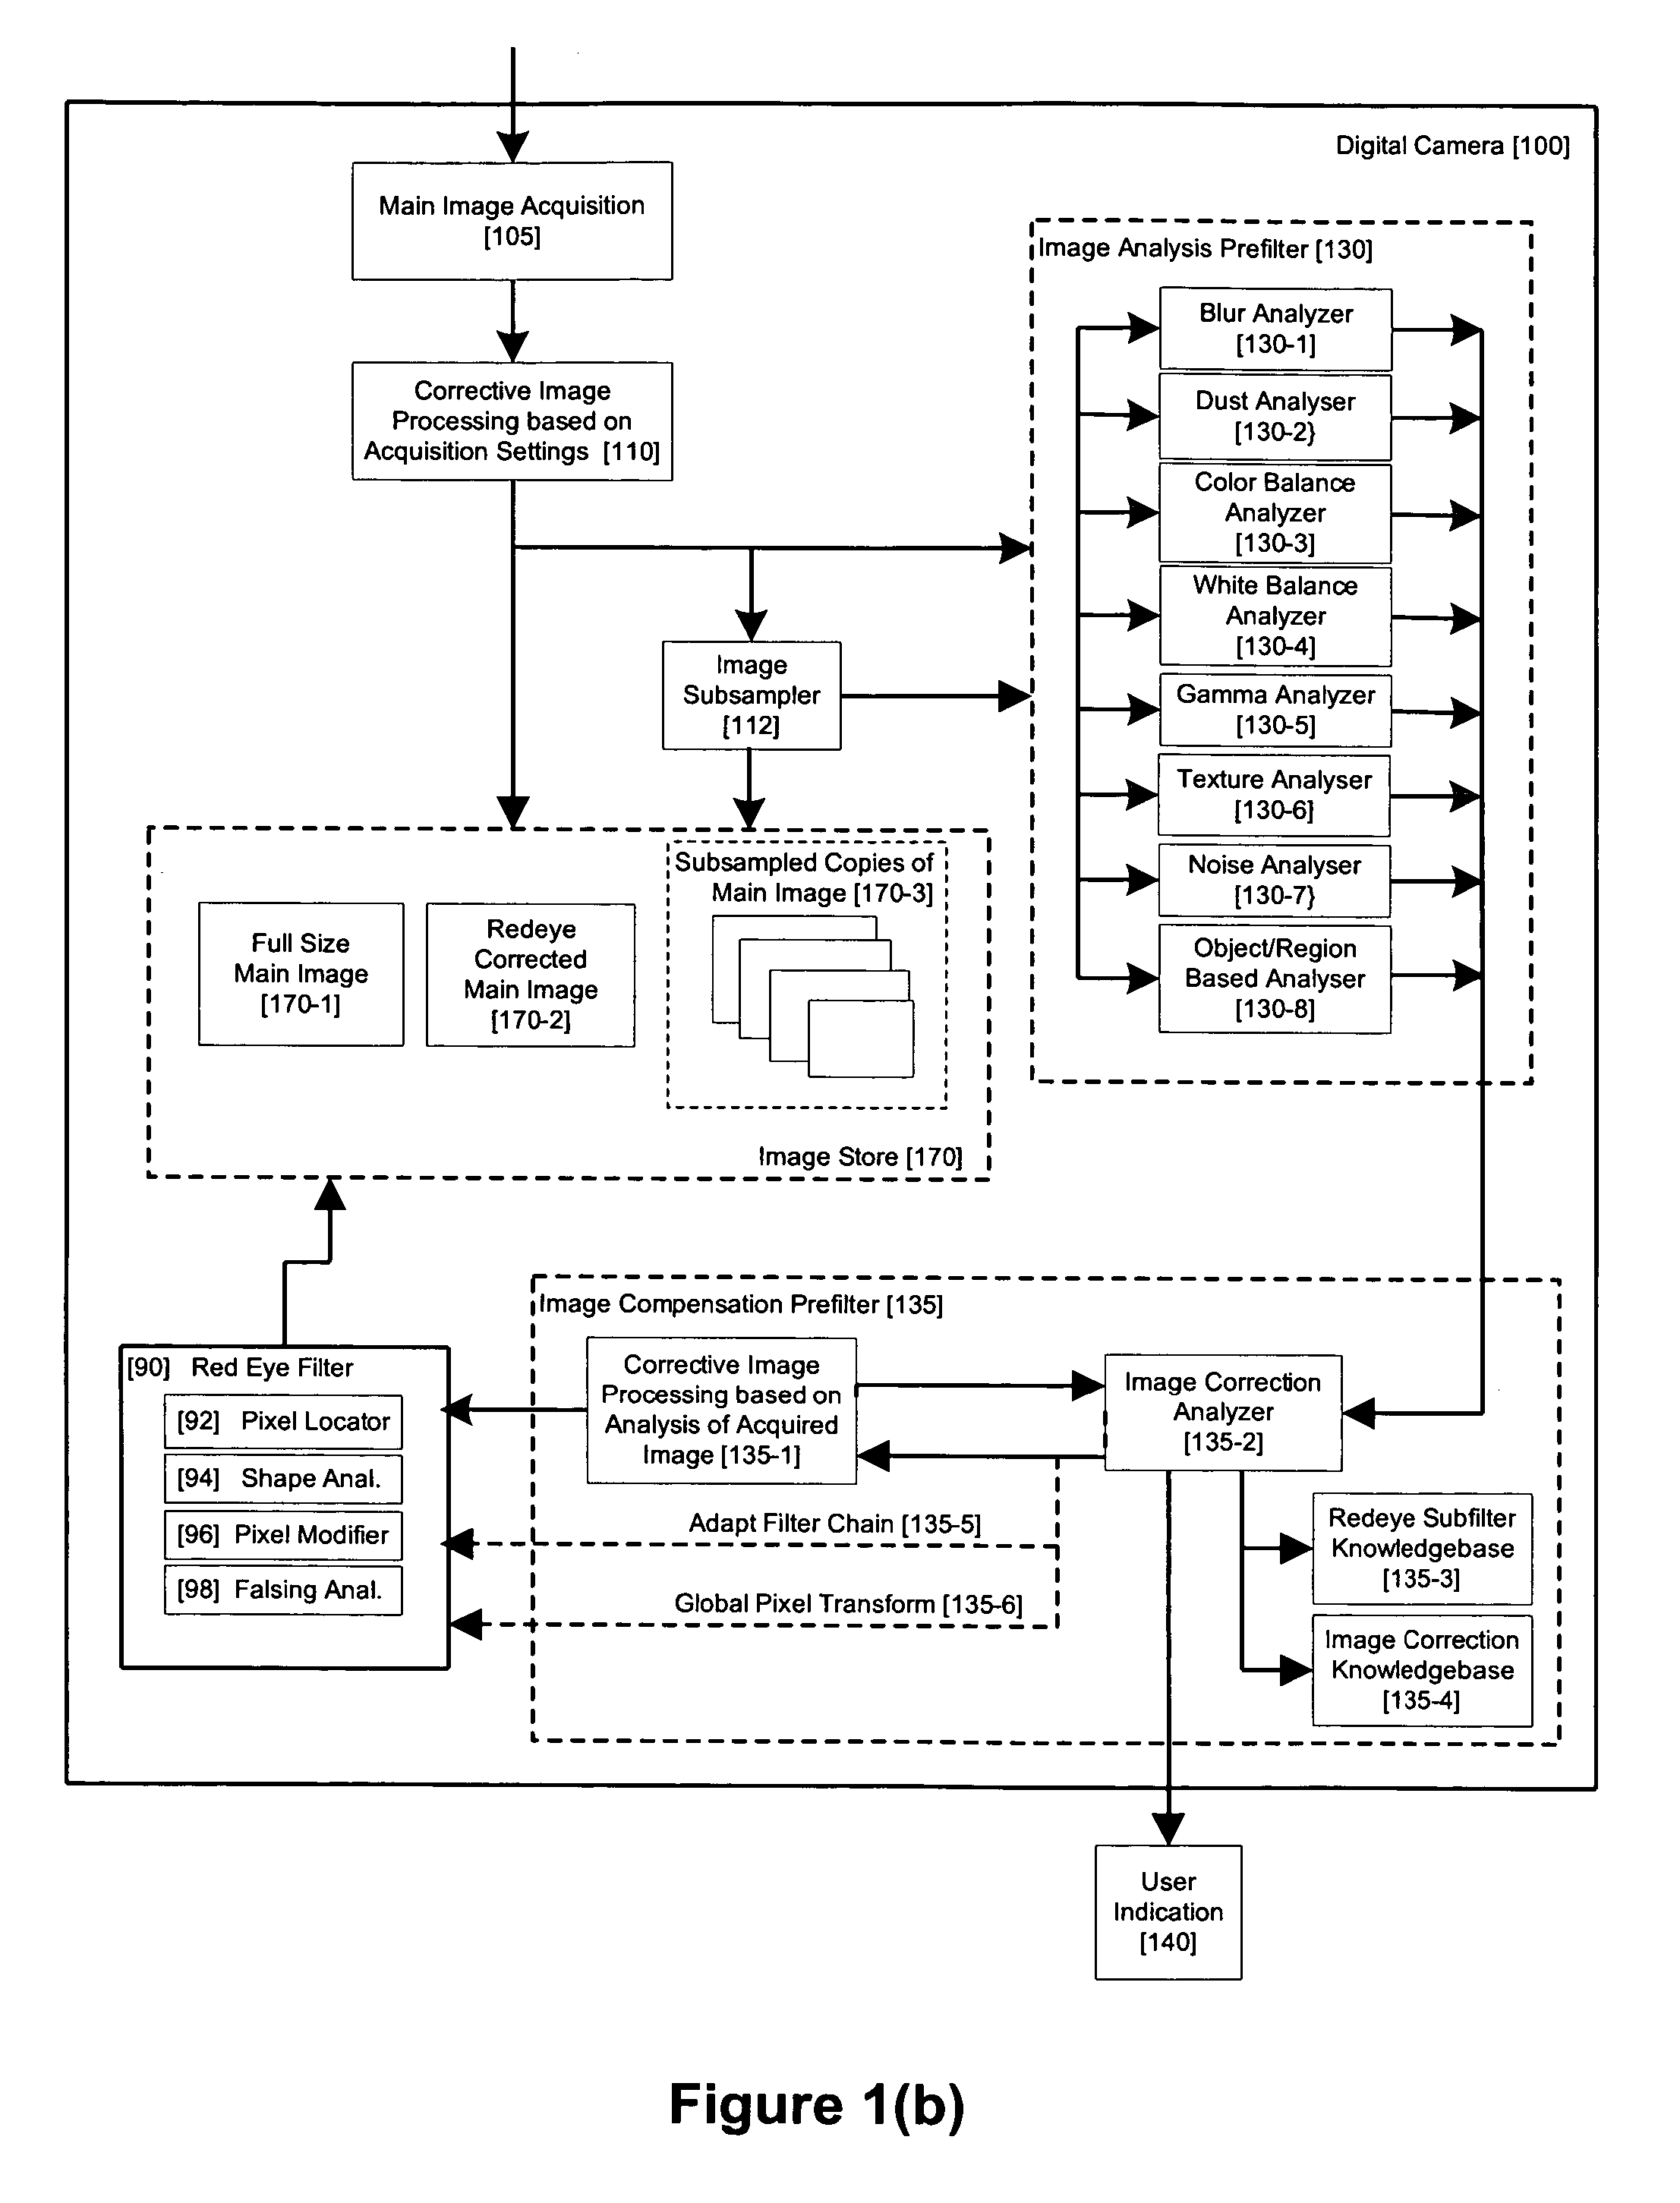 Method and apparatus for red-eye detection in an acquired digital image based on image quality pre and post filtering